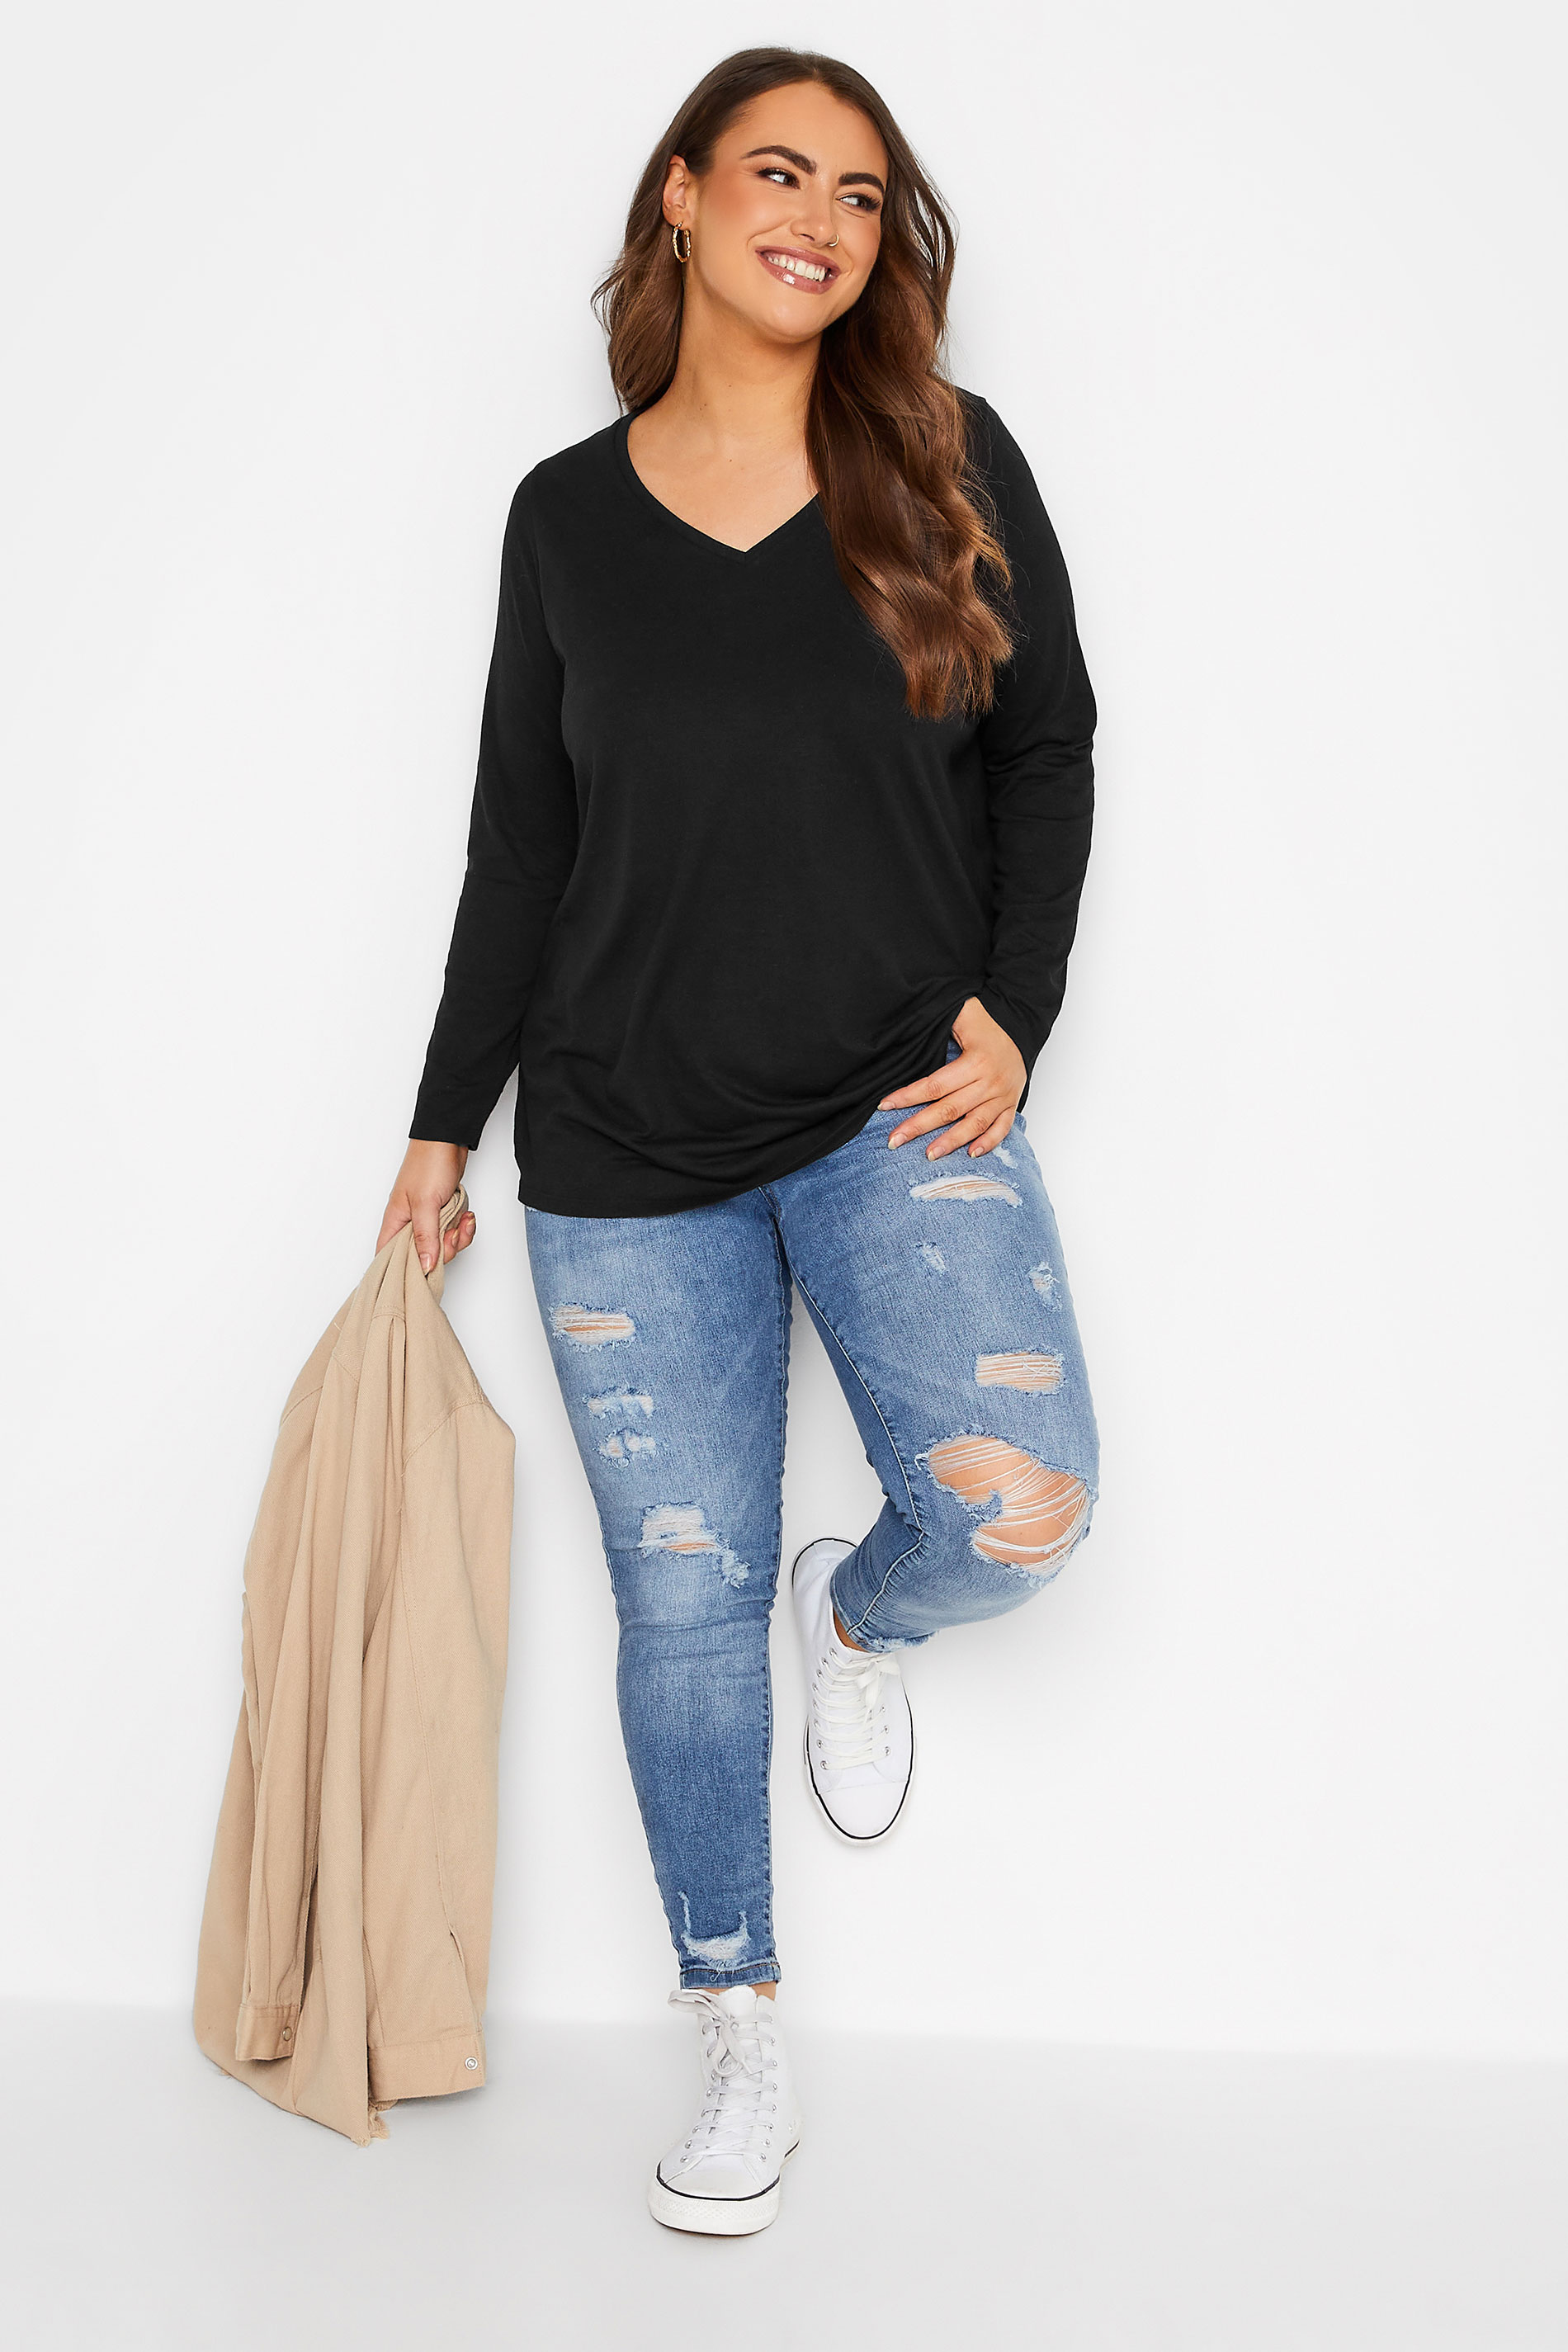 YOURS Plus Size Black Long Sleeve Essential T-Shirt | Yours Clothing 2